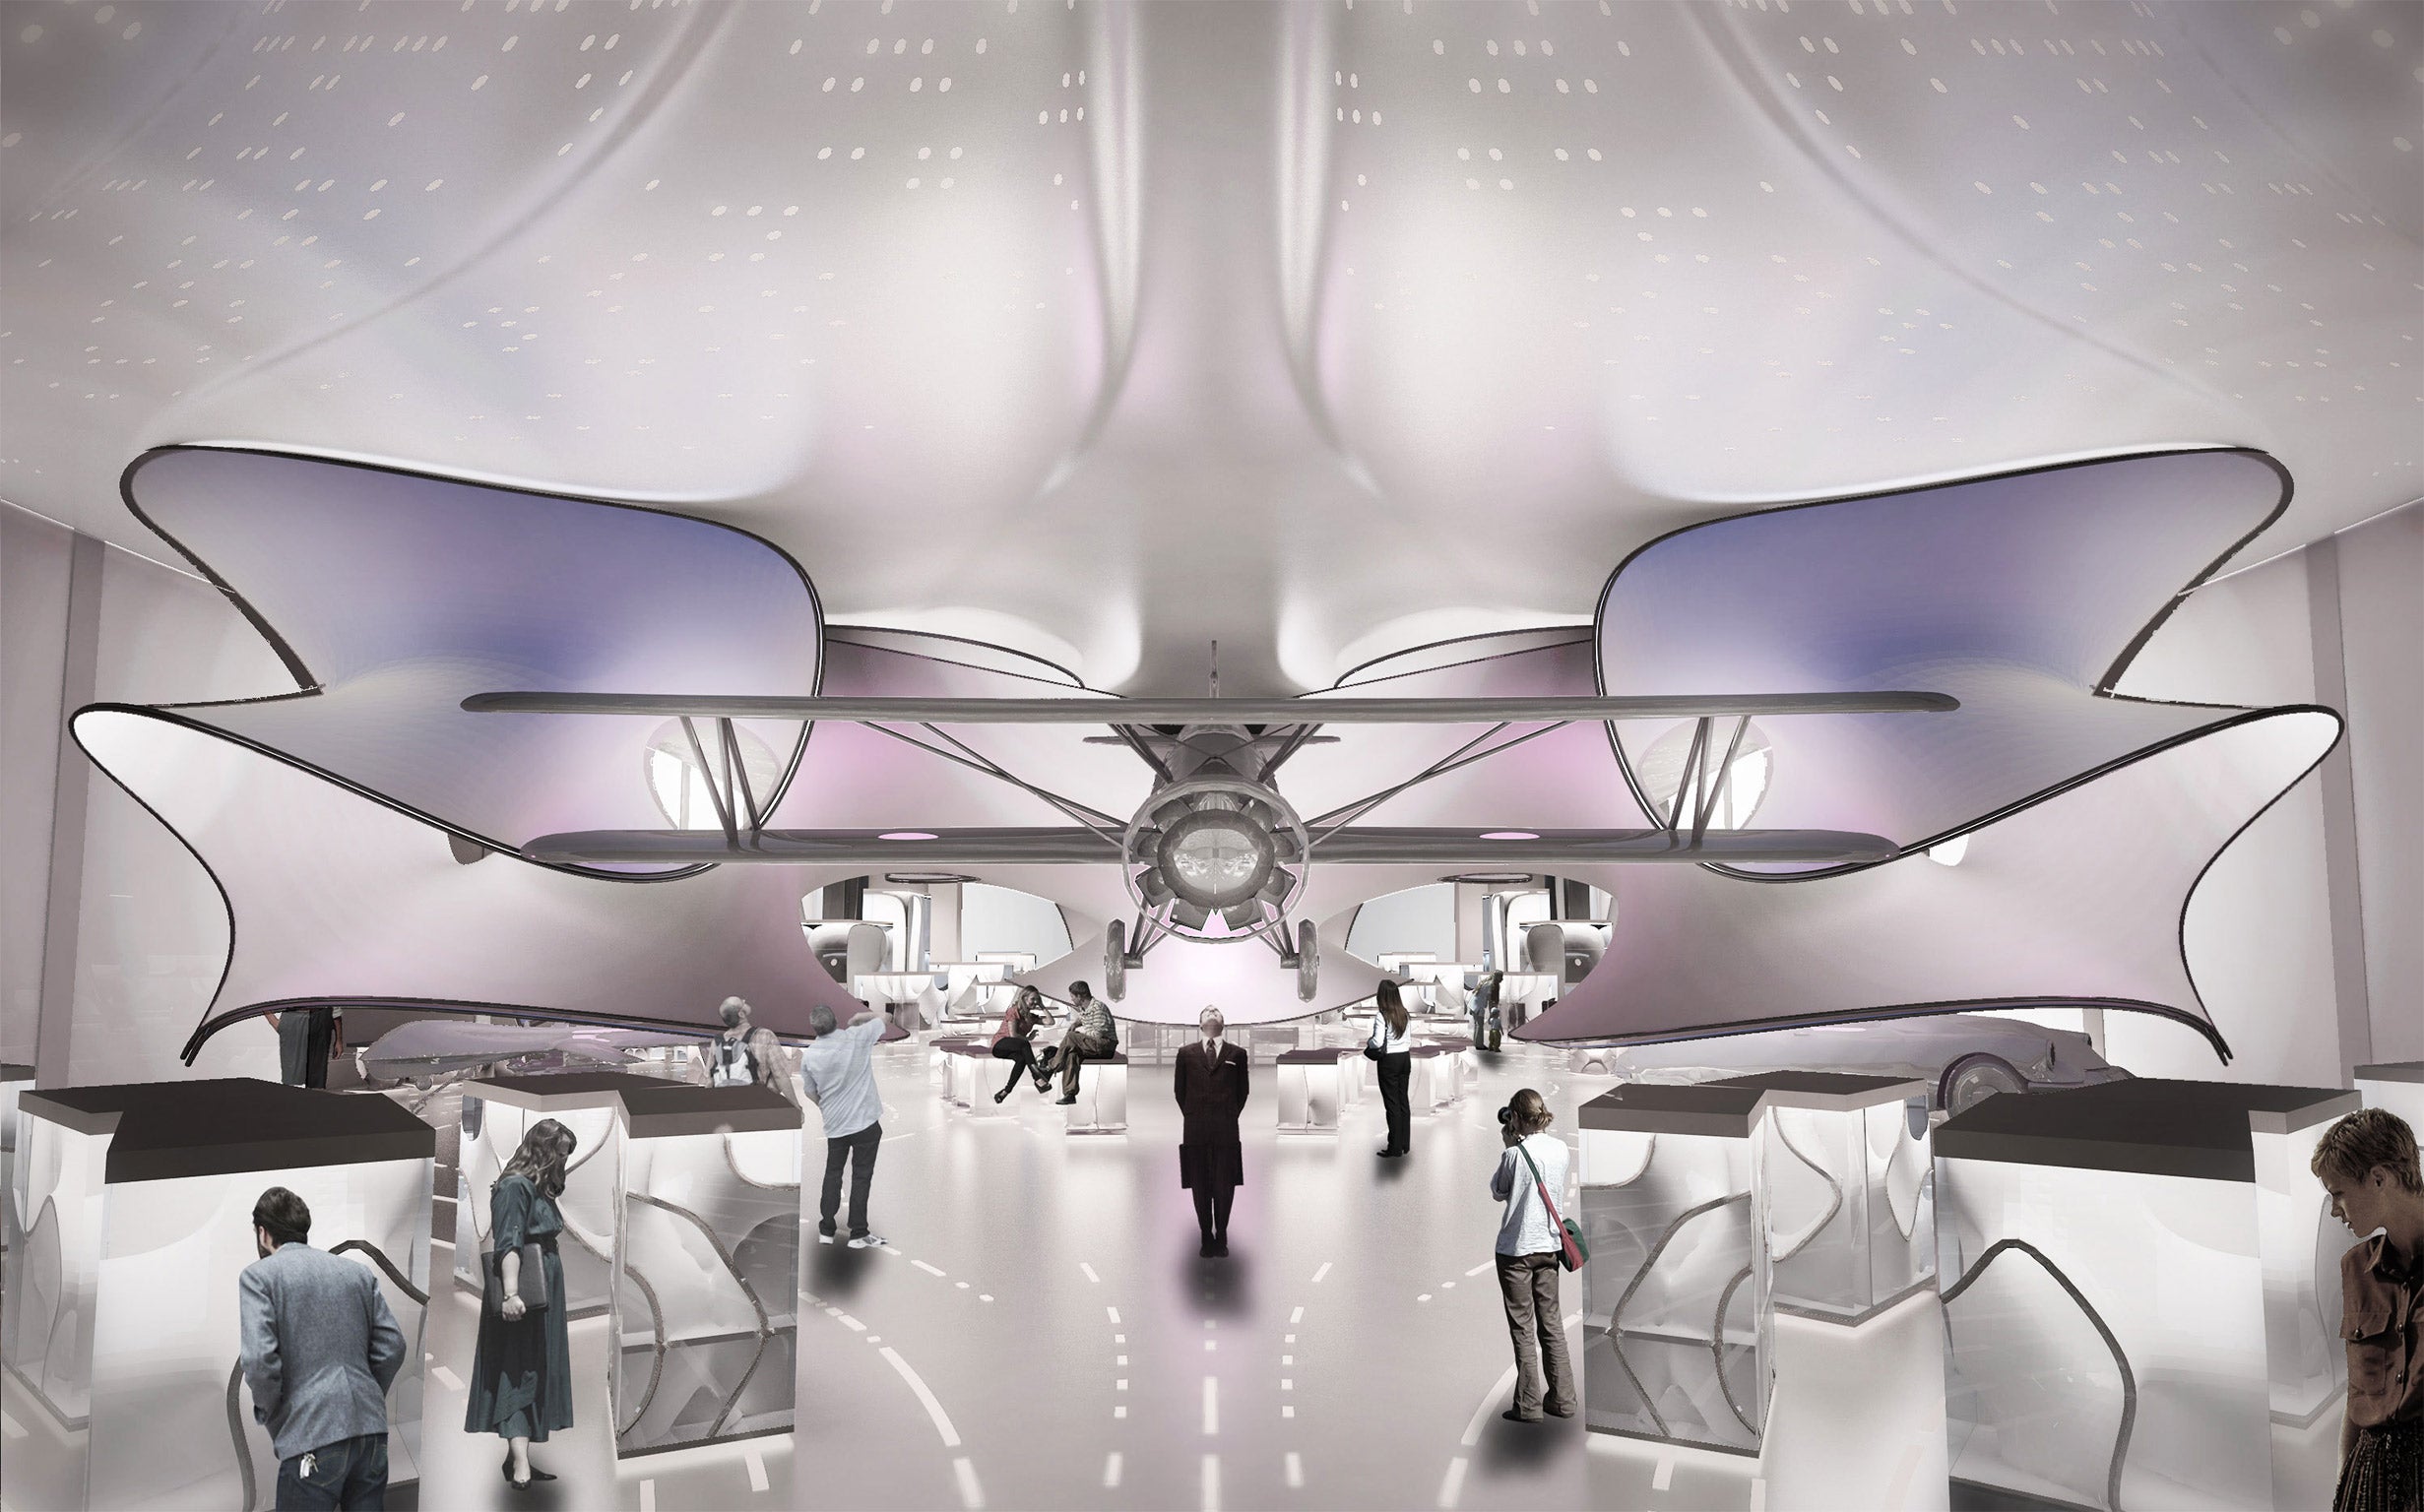 An artist’s impression of the new Science Museum gallery